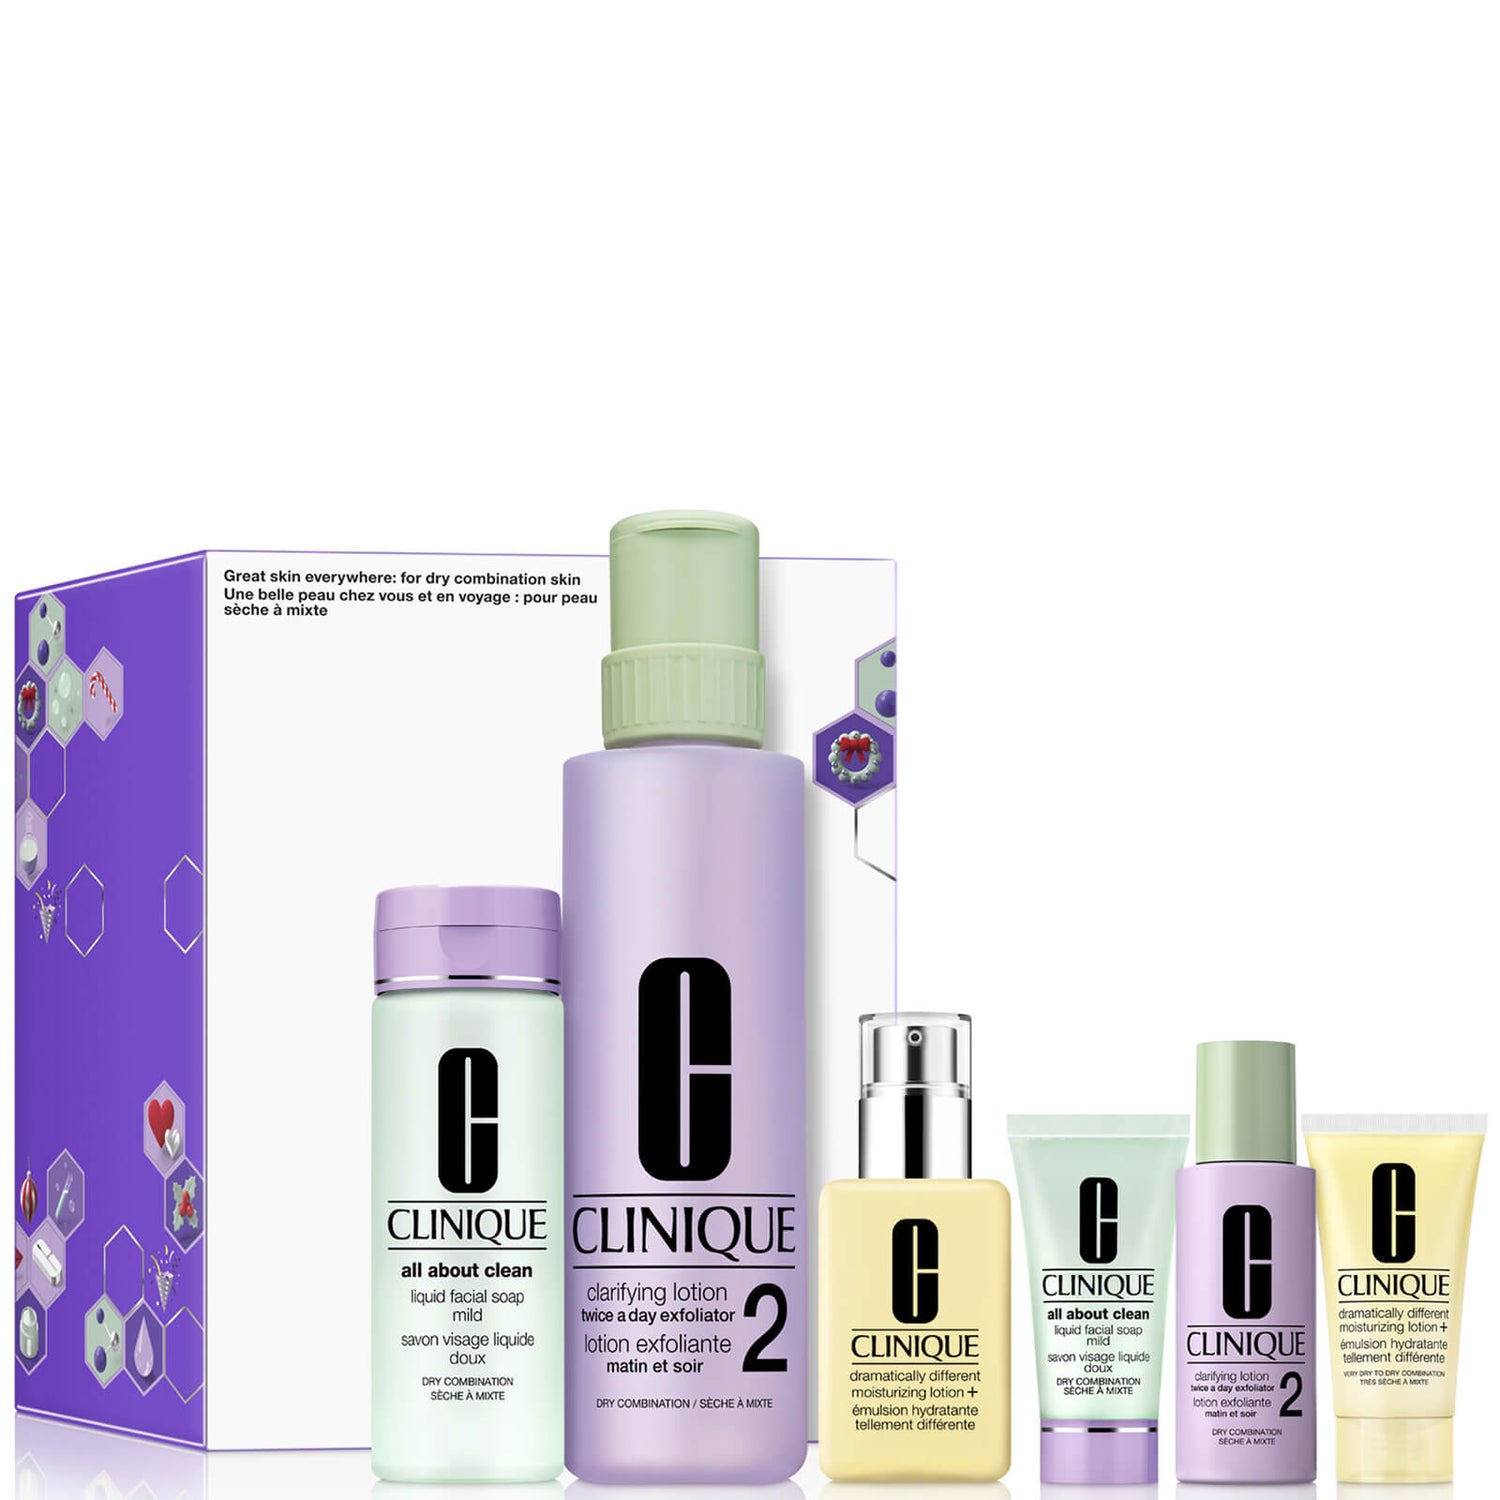 Clinique Great Skin Everywhere Skincare Gift Set for Dry Combination Skin (Worth £110.95)